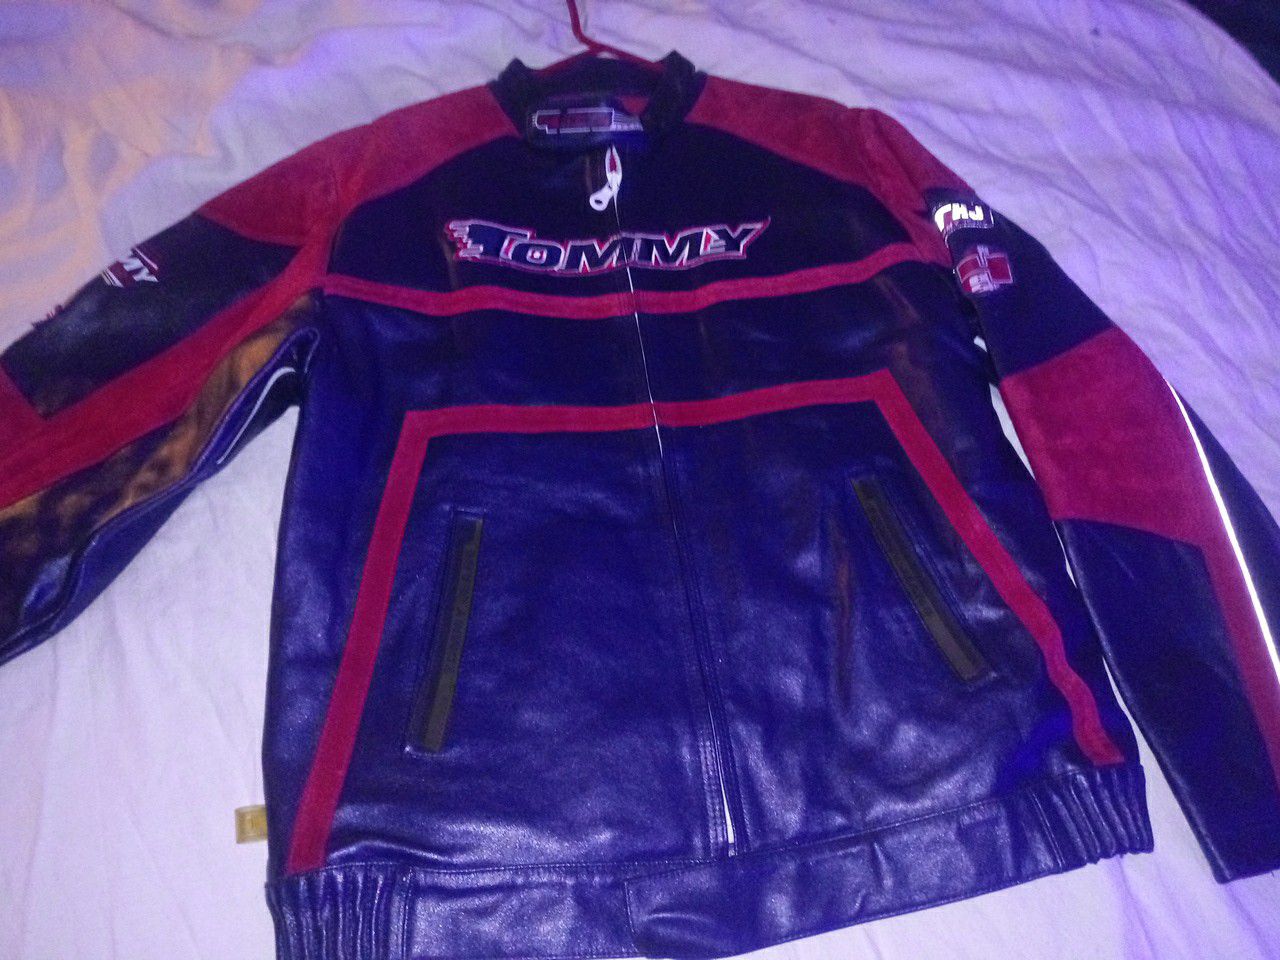 Motorcycle jacket by Tommy Hilfiger